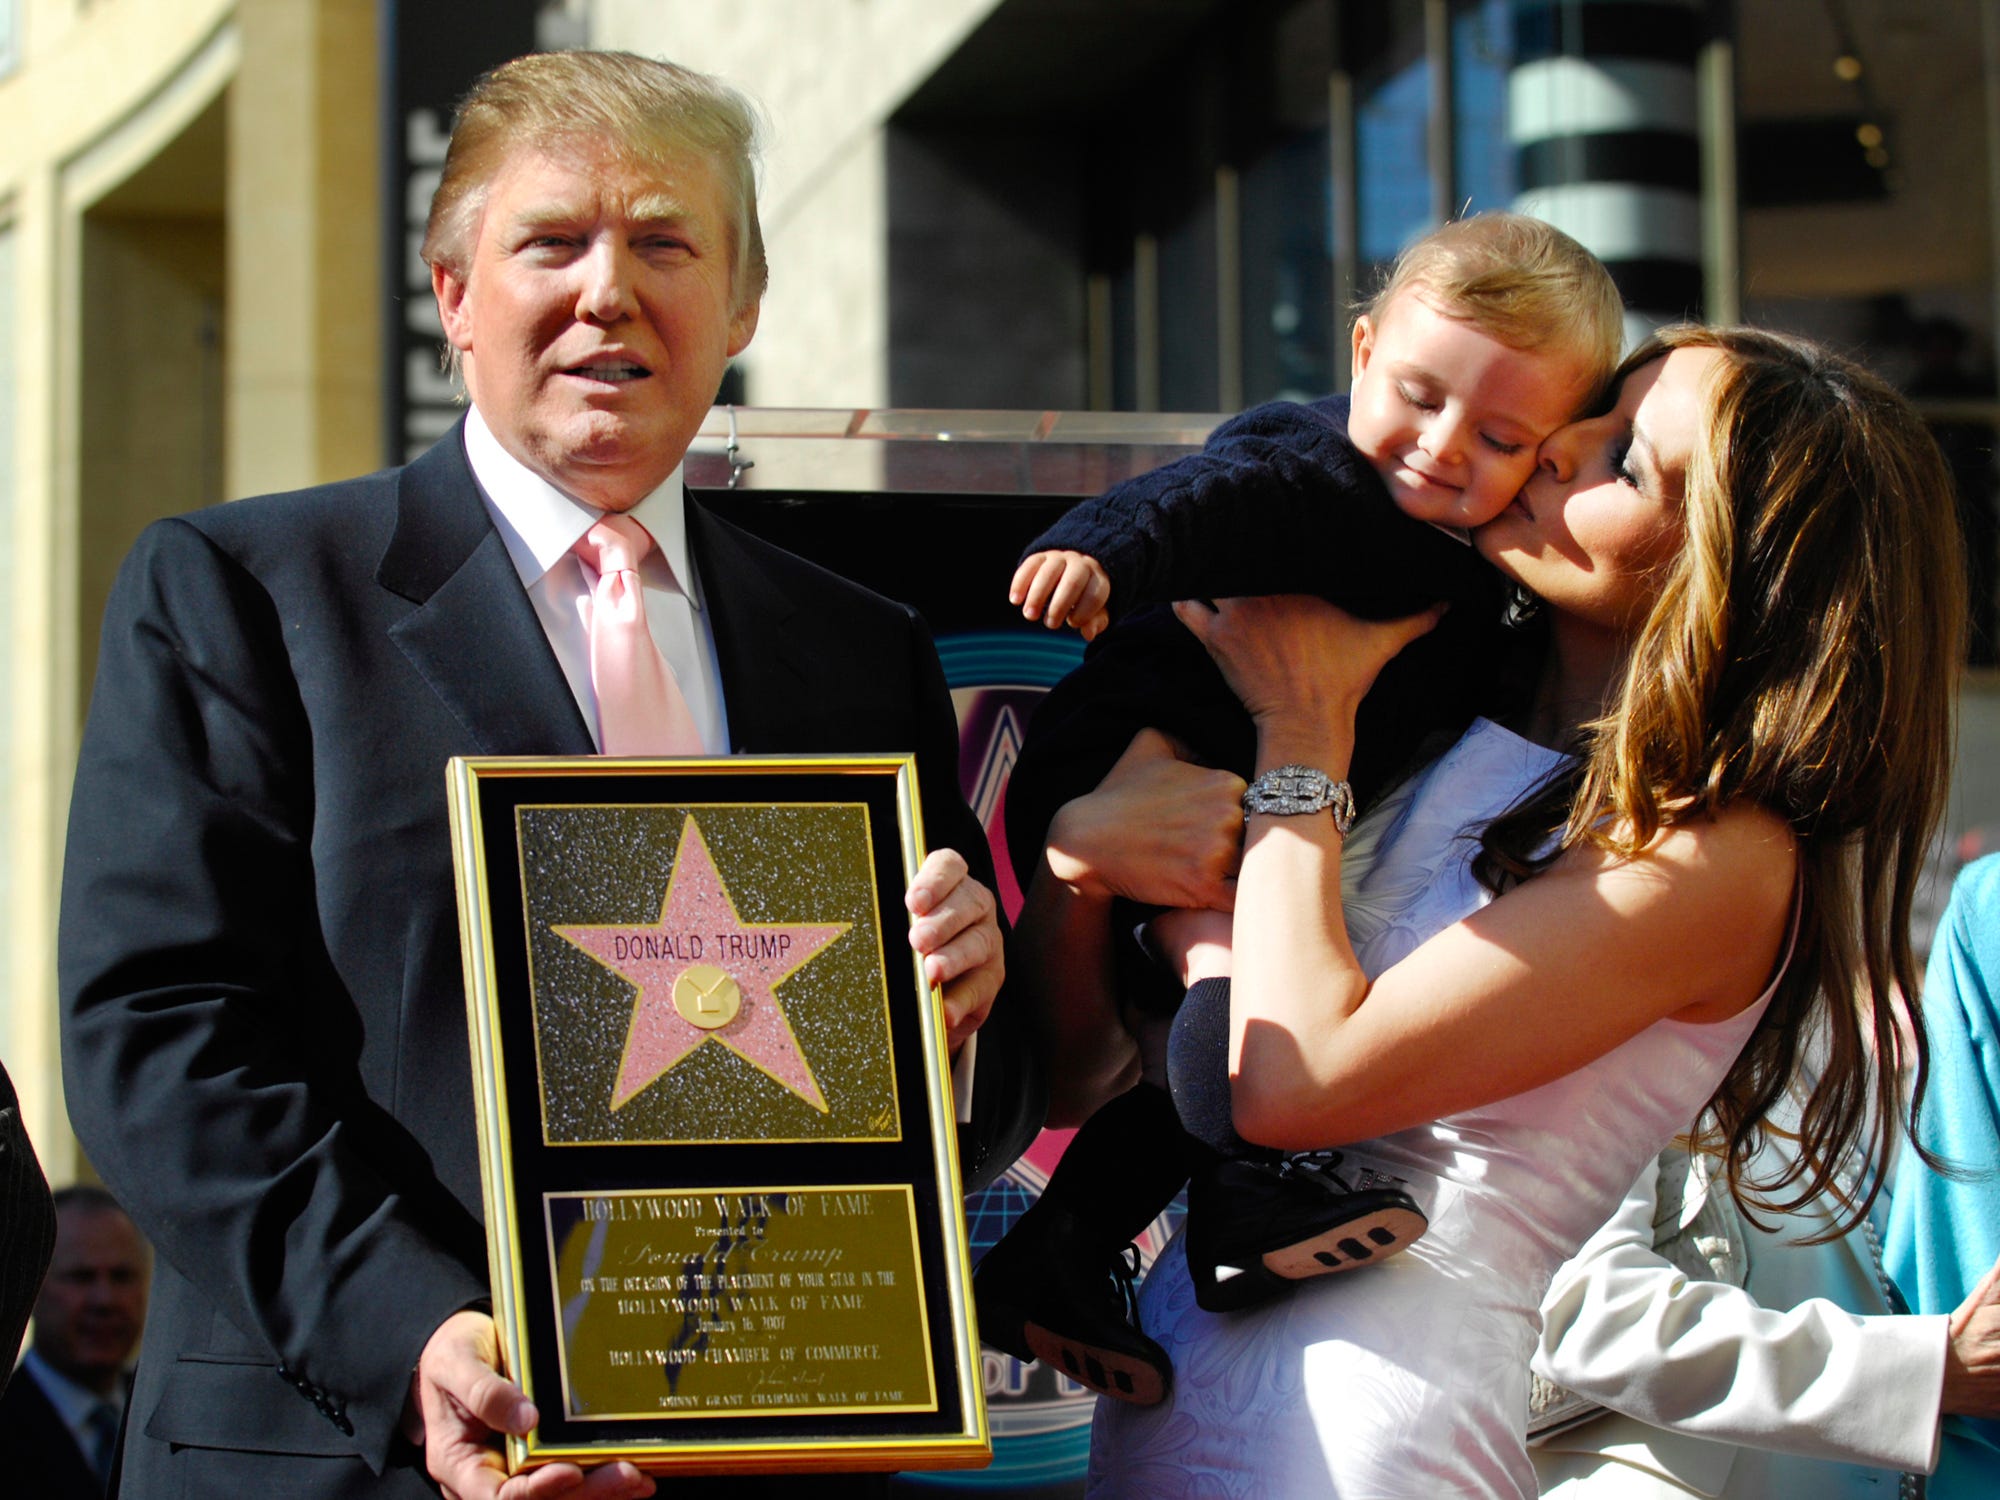 <p>While the Trumps have staff to help with cooking and housework, Trump told <a href="https://www.businessinsider.com/melania-trump-full-time-mom-2018-1">People magazine</a> in 2018 that she's a "hands-on" mom who didn't hire a traditional nanny. <a href="https://pagesix.com/2015/10/06/donald-trumps-son-does-in-fact-have-a-live-in-nanny/">Page Six</a> reported that the Trumps did, in fact, have a live-in nanny.</p>